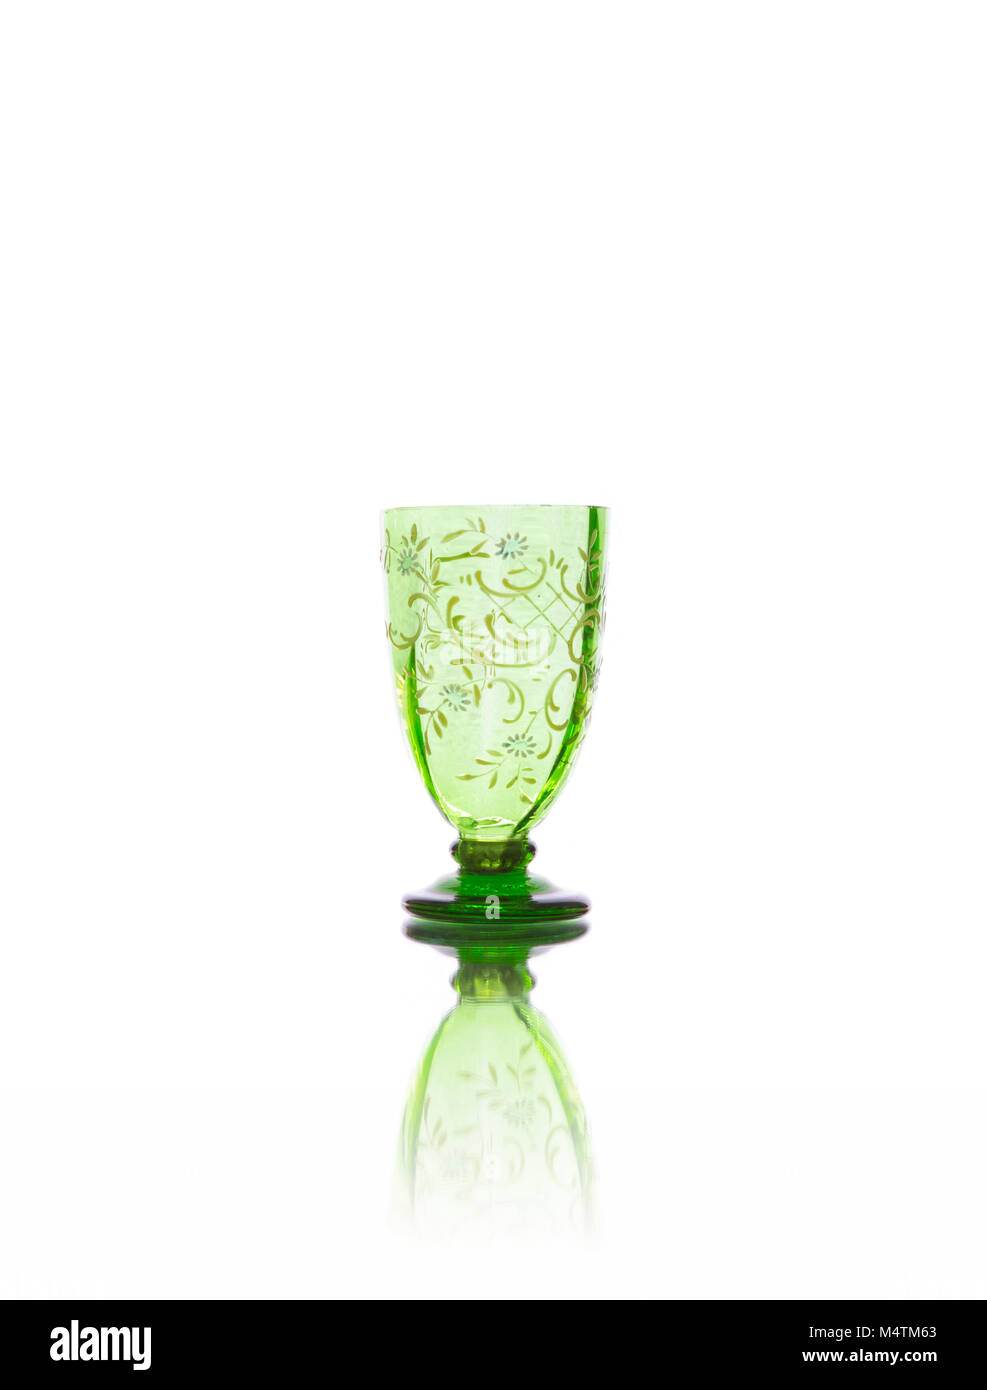 Antique glass isolated on white background Stock Photo